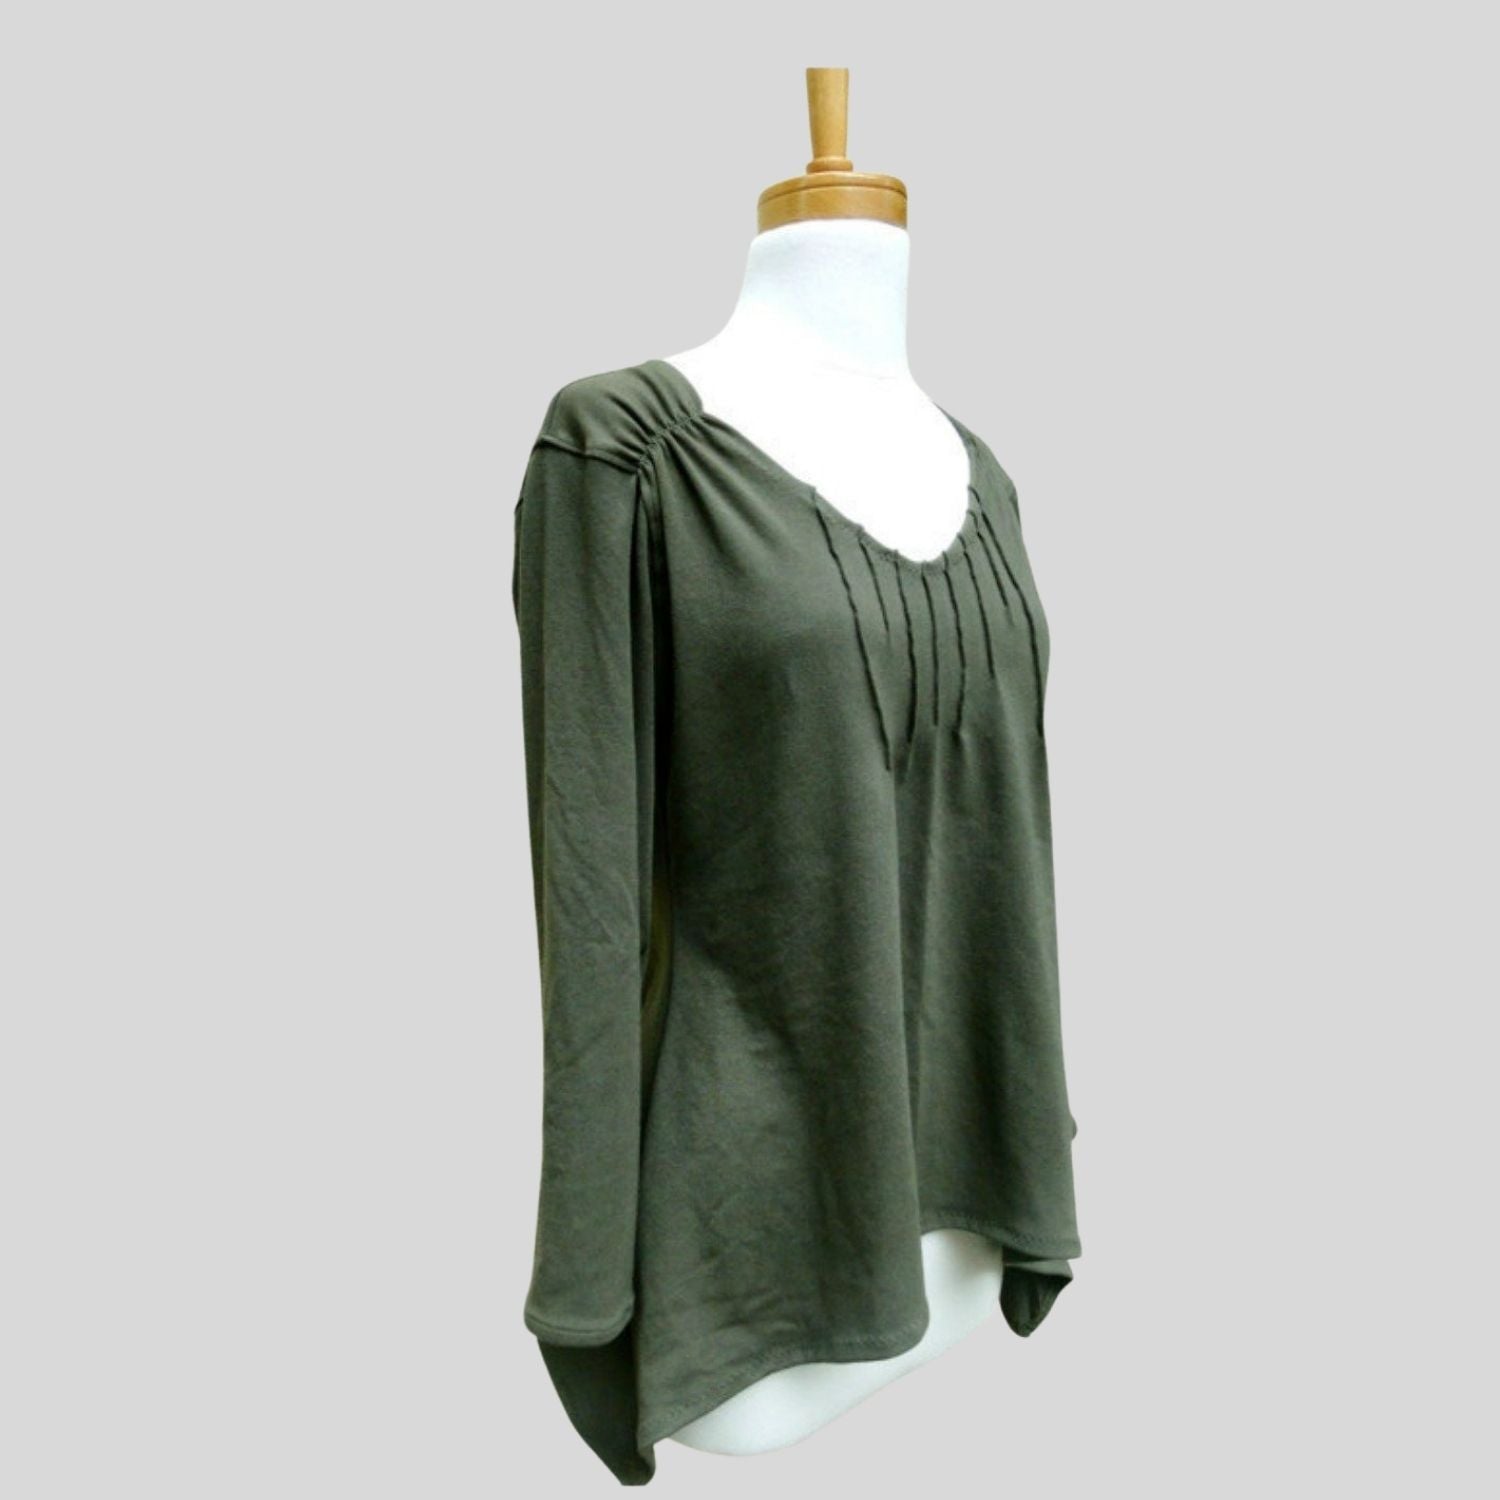 flare green top | Dark green Organic cotton tunic top with cinched shoulders | Made in Canada organic cotton tunic tops for women | Econica